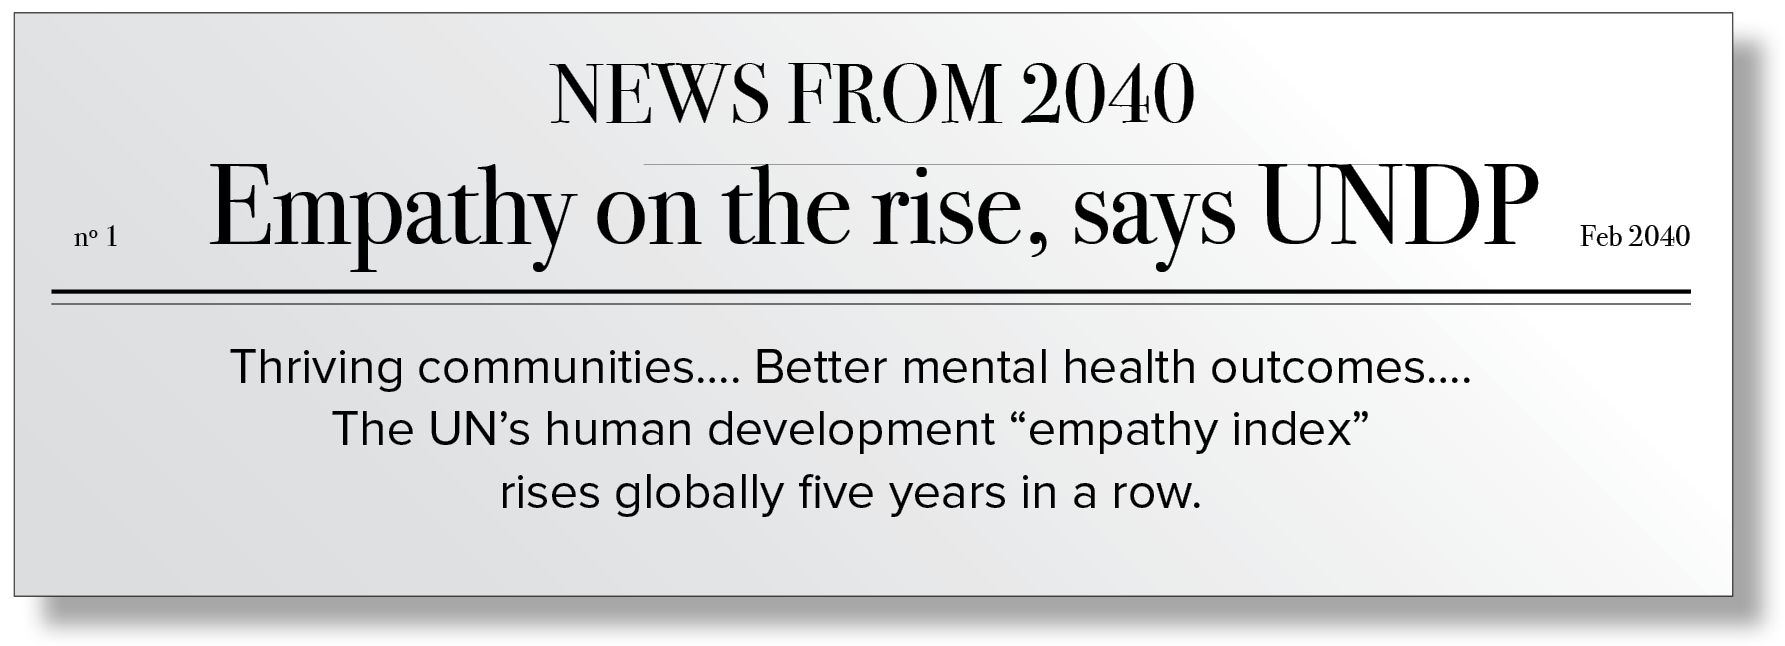 Fictional newspaper article from 2040 with the following text: Thriving communities…. Better mental health outcomes….The UN’s human development “empathy index” rises globally five years in a row. 